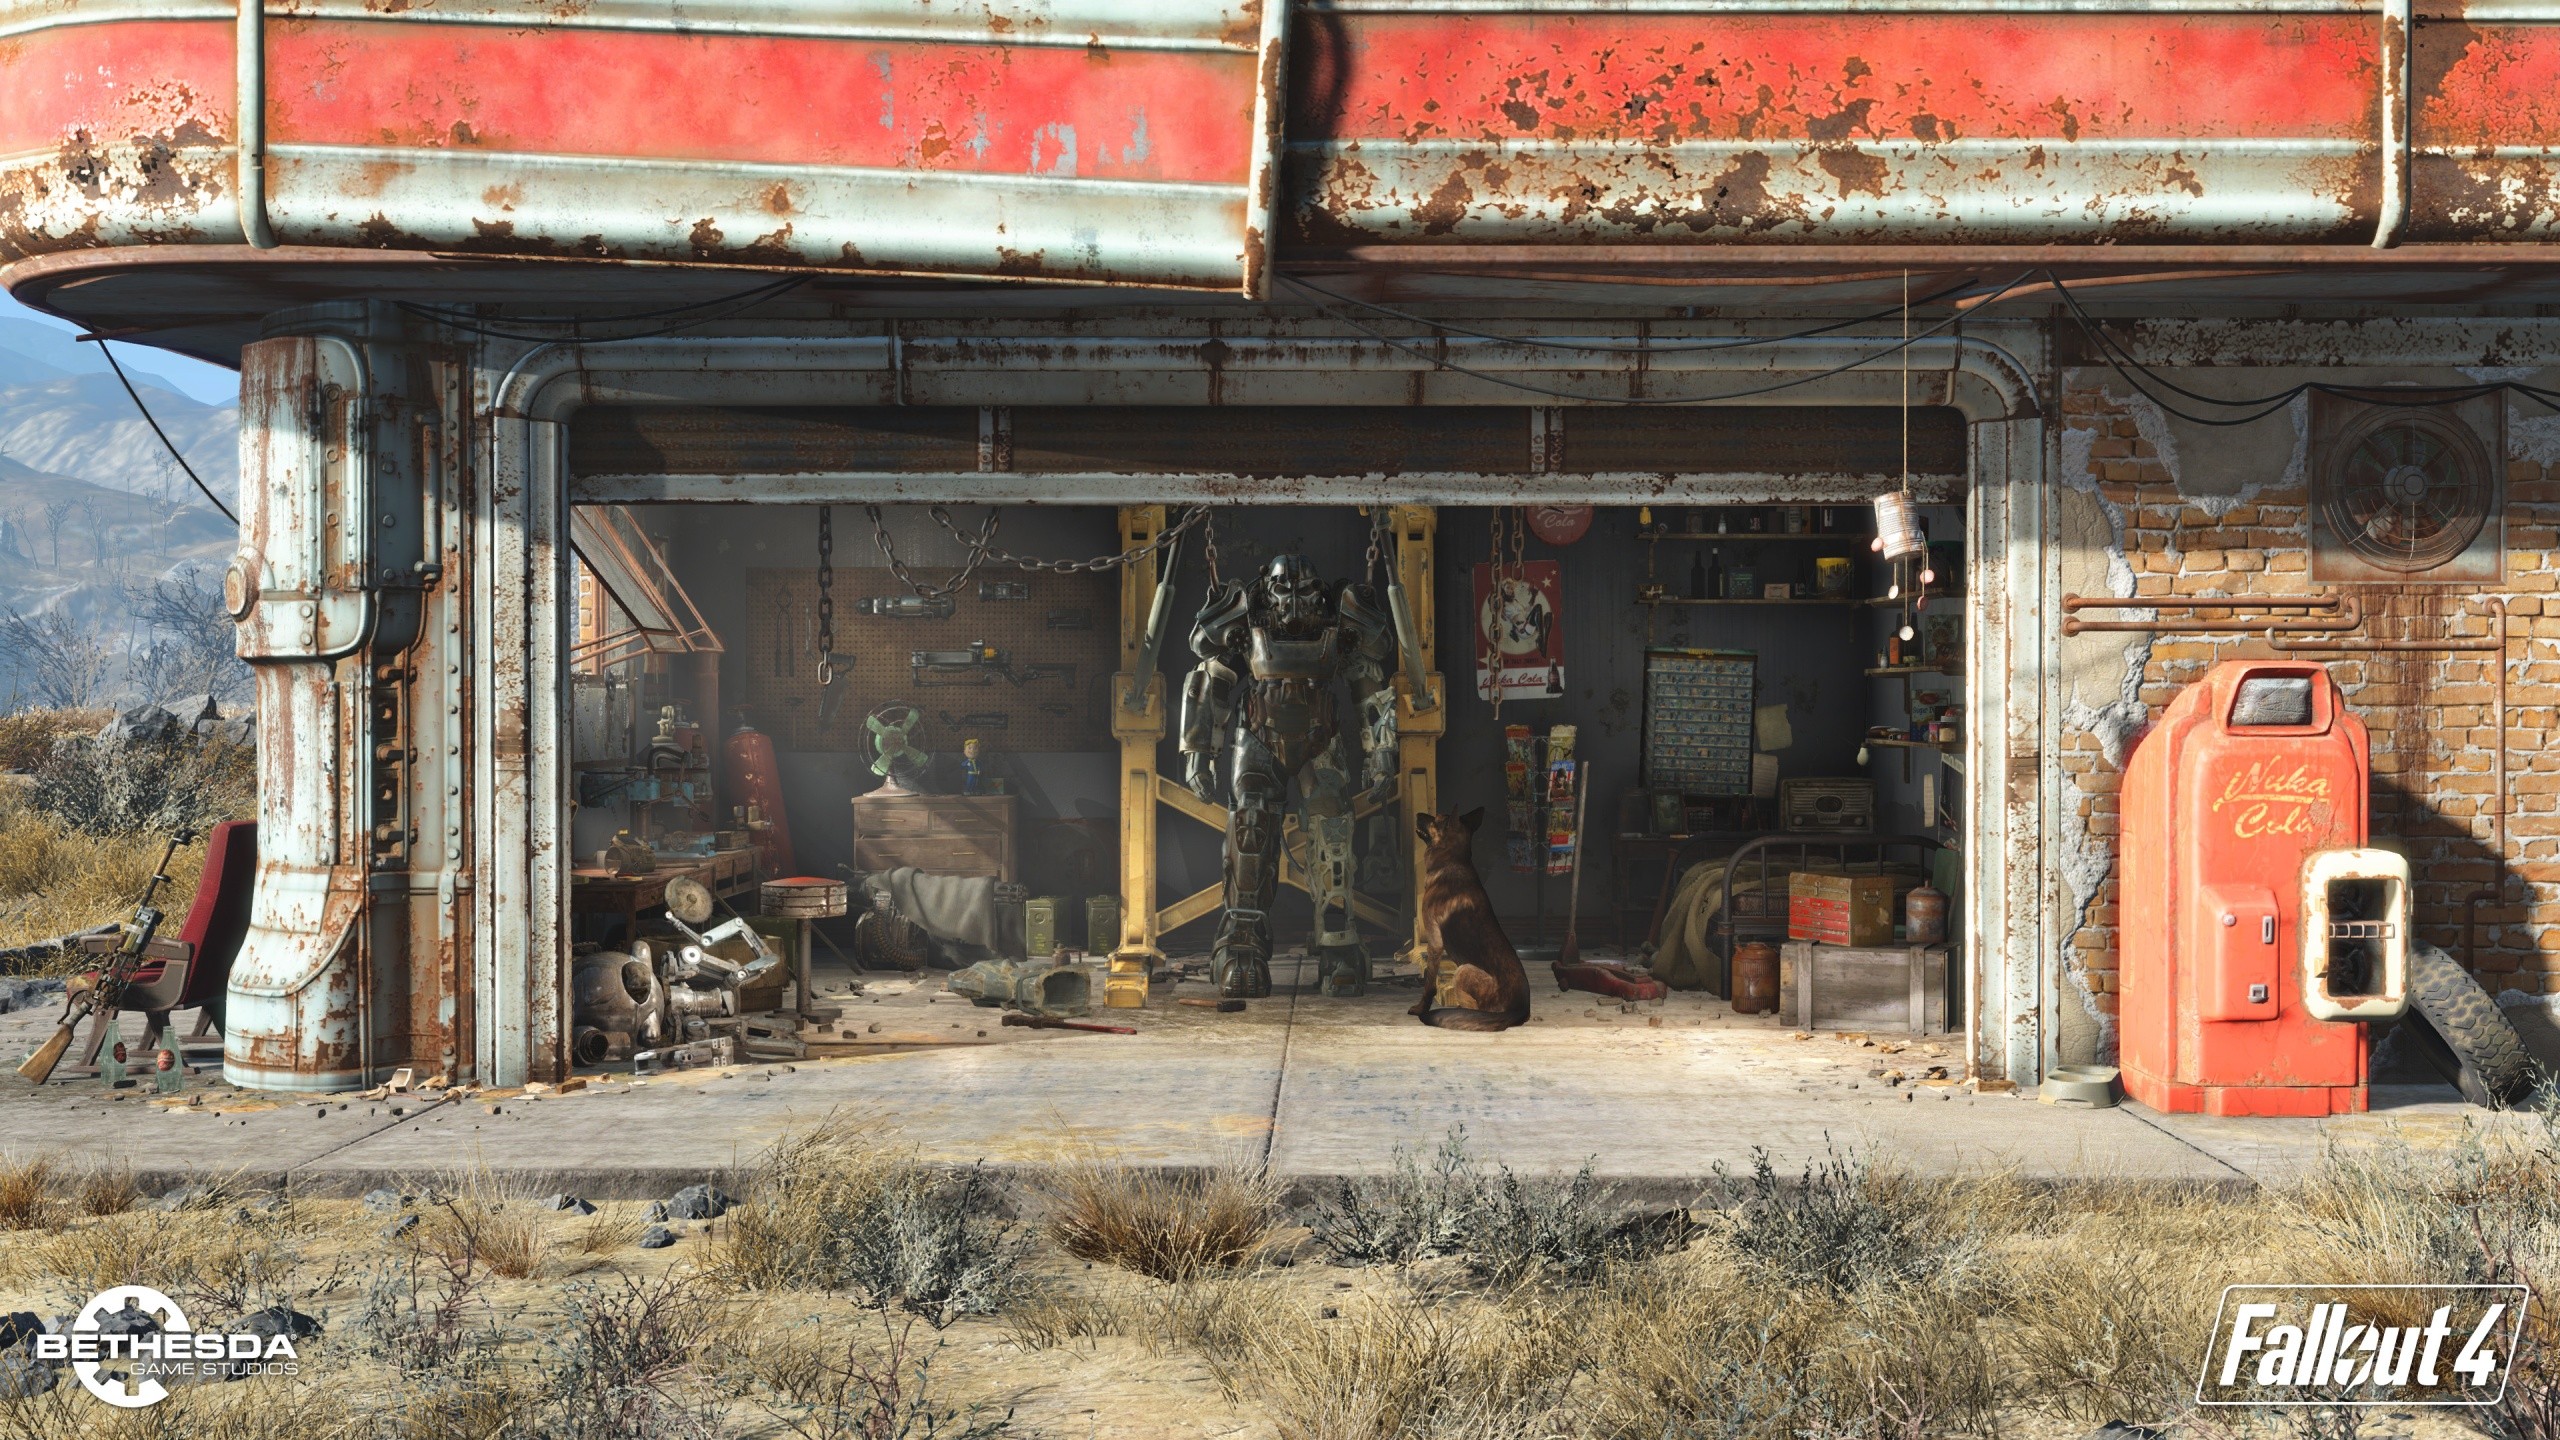 Fallout 4, Bethesda Softworks, Video Games, Fallout Wallpaper